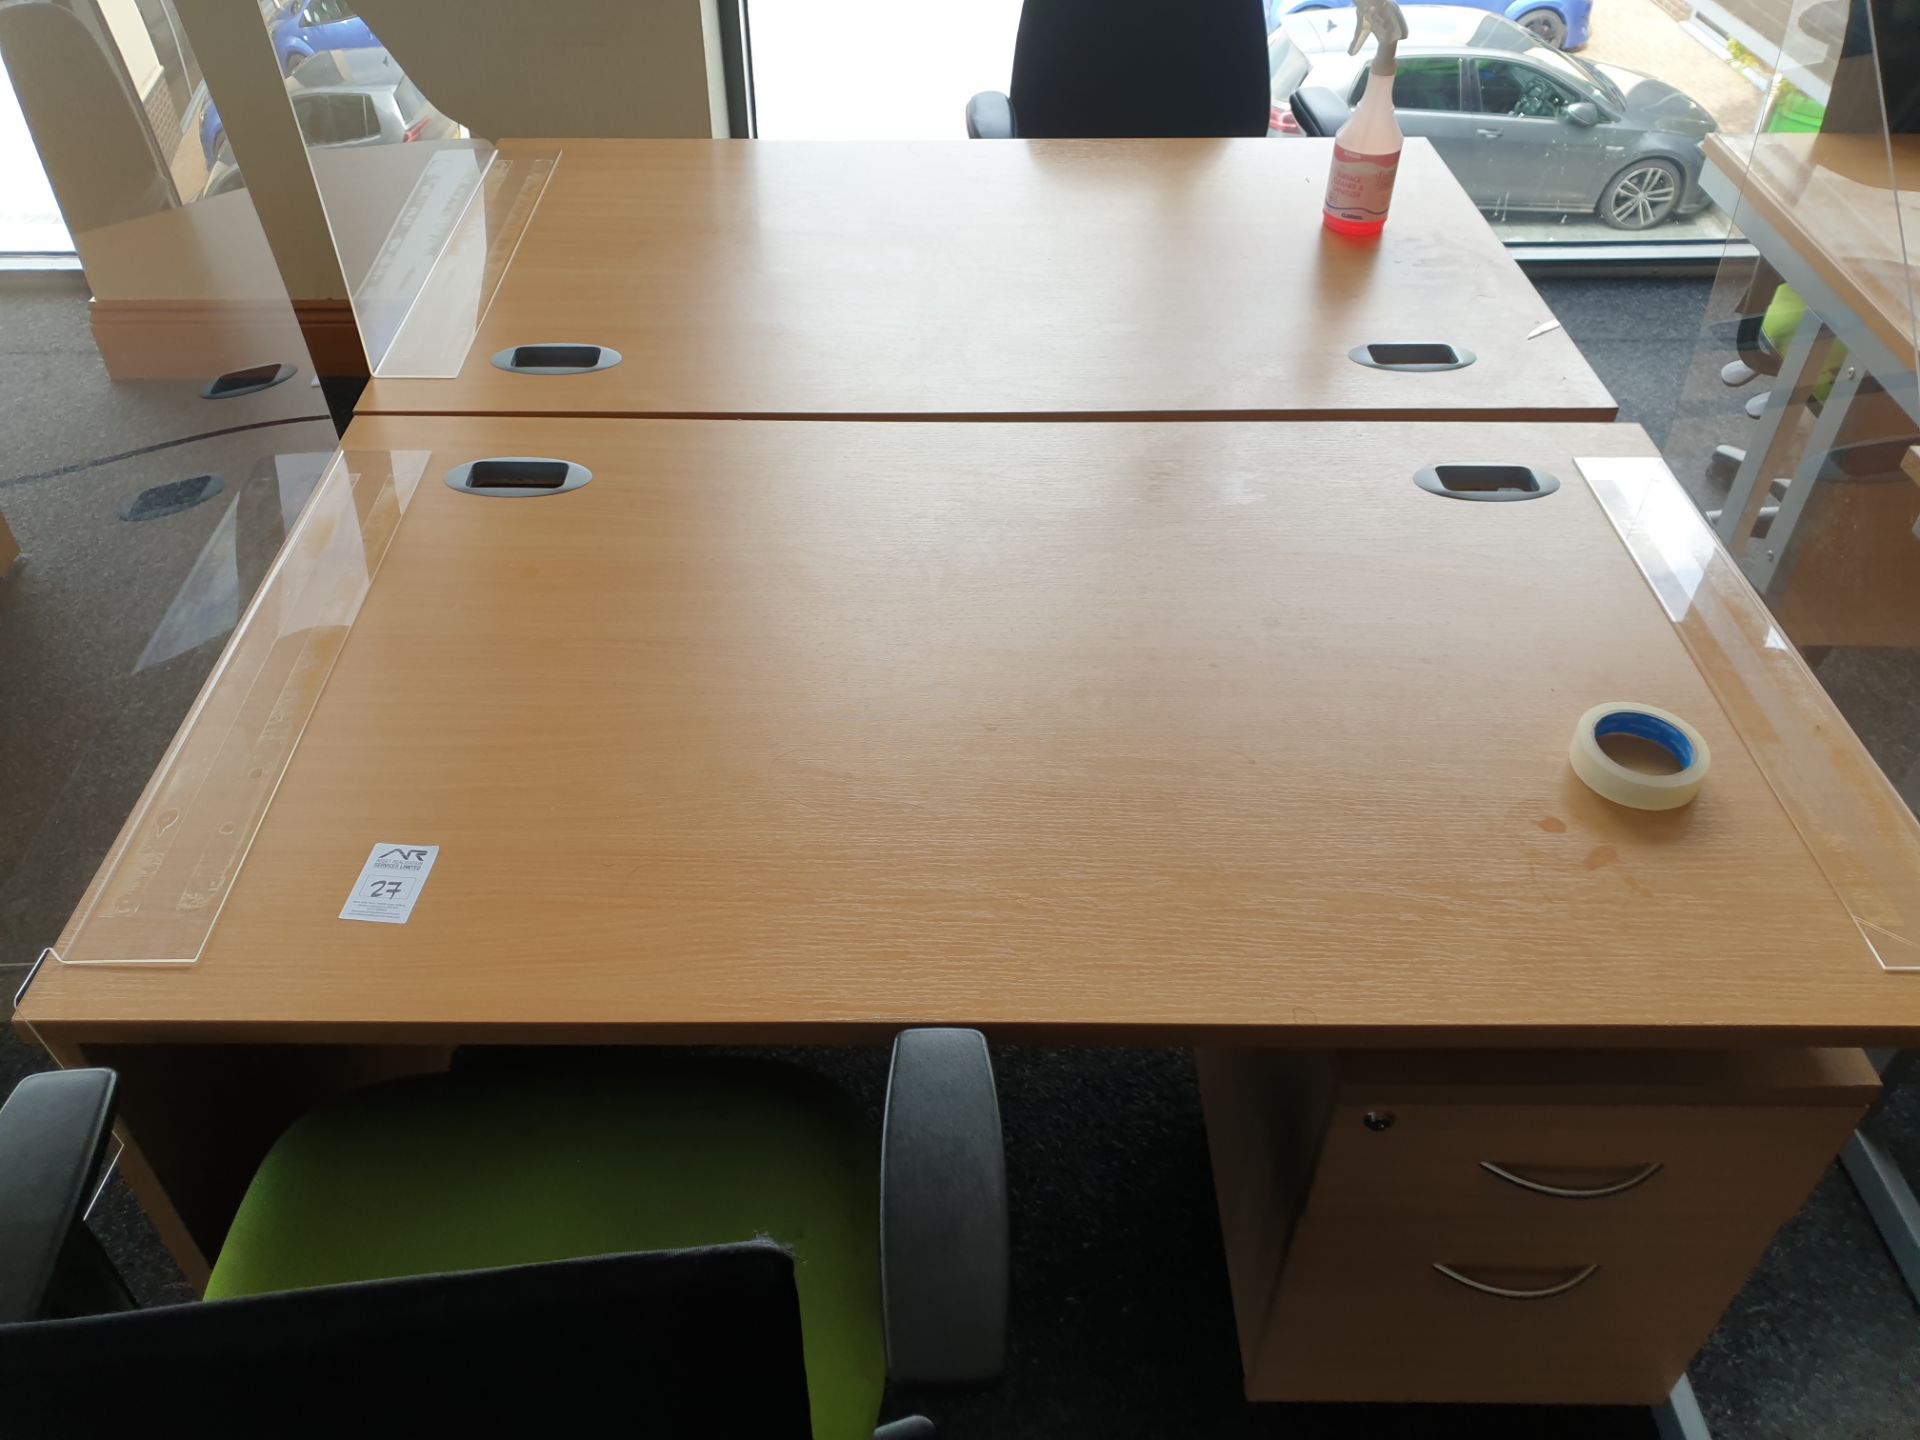 4 Person Workstation / Desks with covid screens - Image 3 of 4